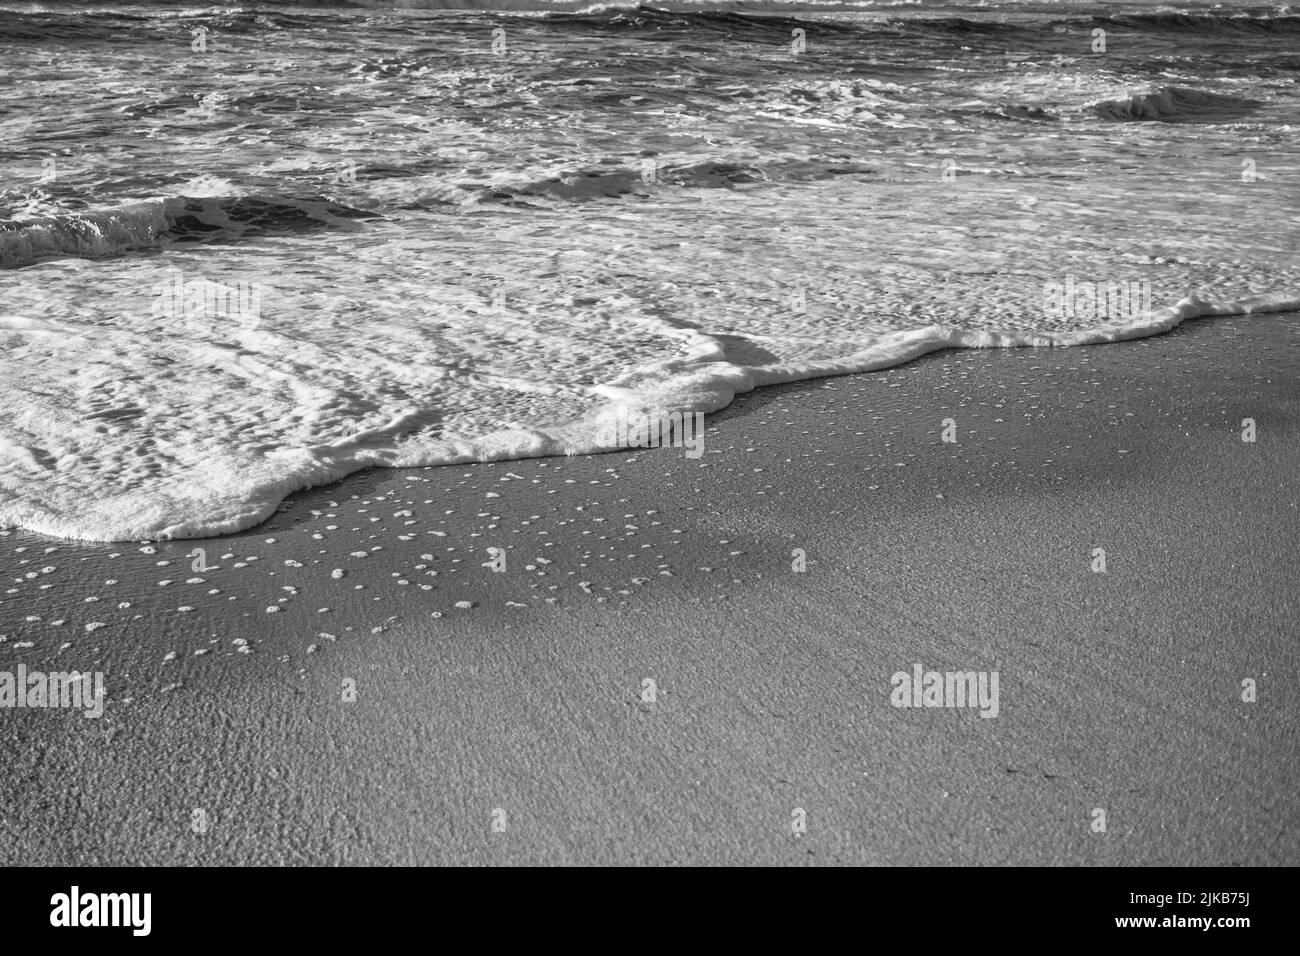 Beach sand with the foam of the surf Atlantic ocean. Black and white photo. Stock Photo